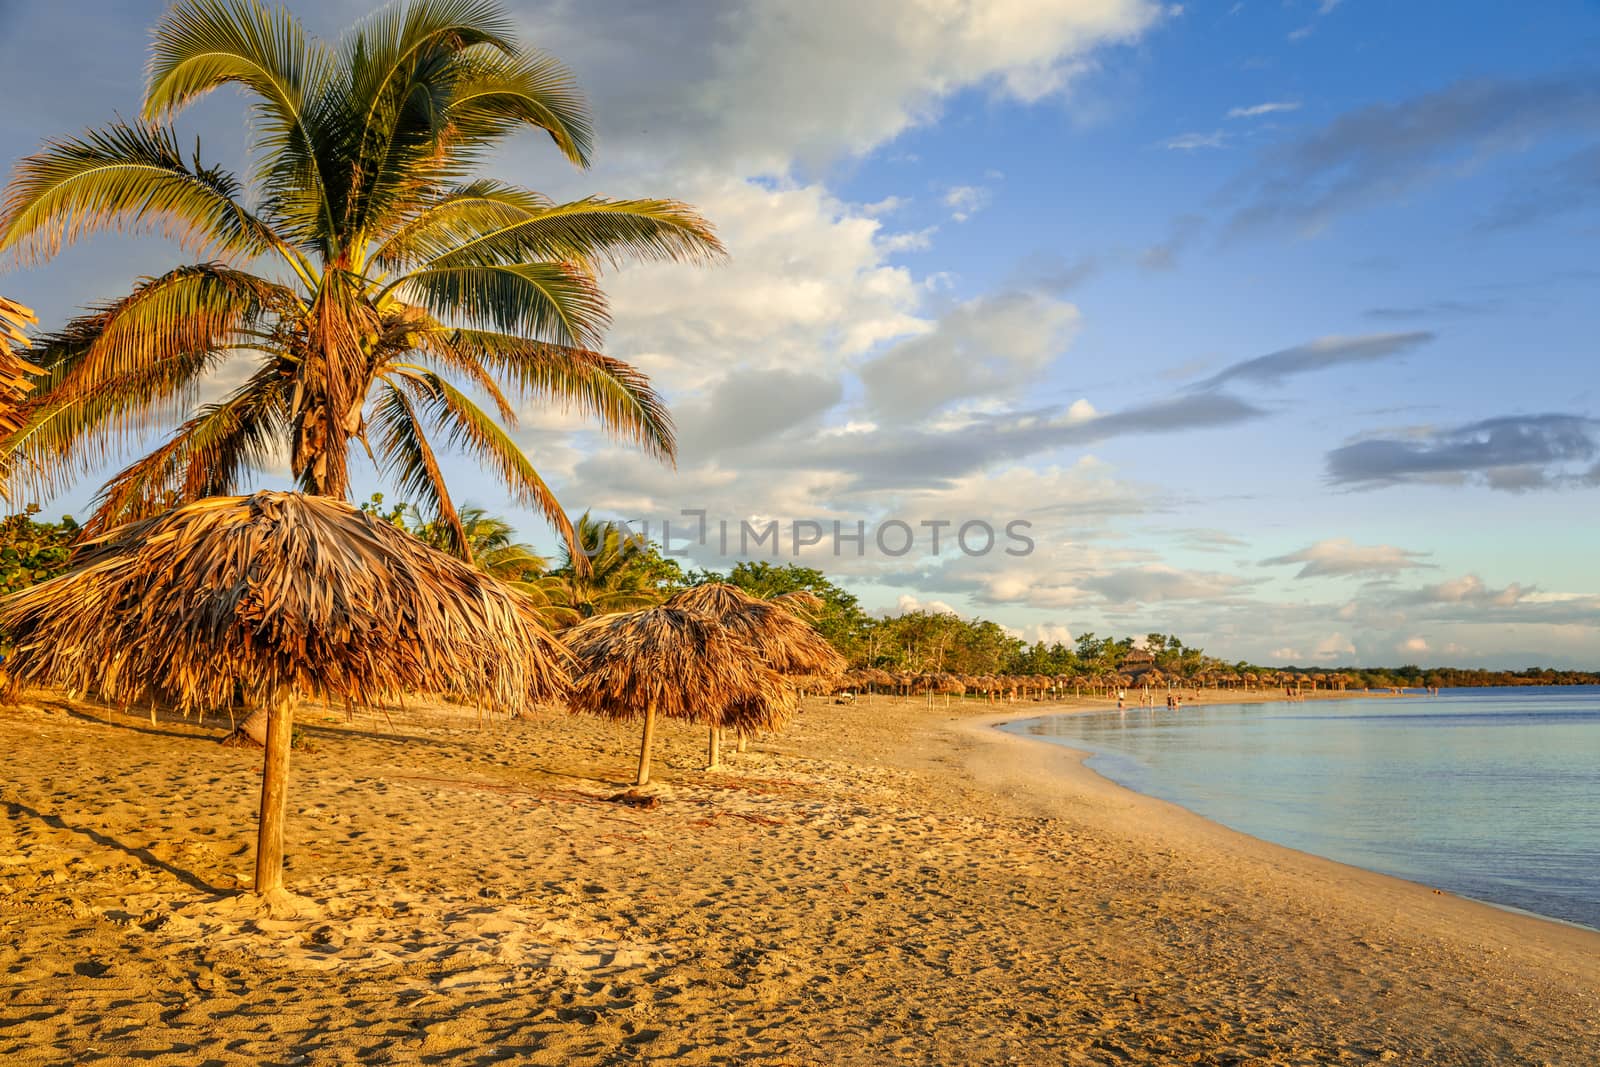 Rancho Luna sandy beach with palms and straw umrellas on the sho by ambeon